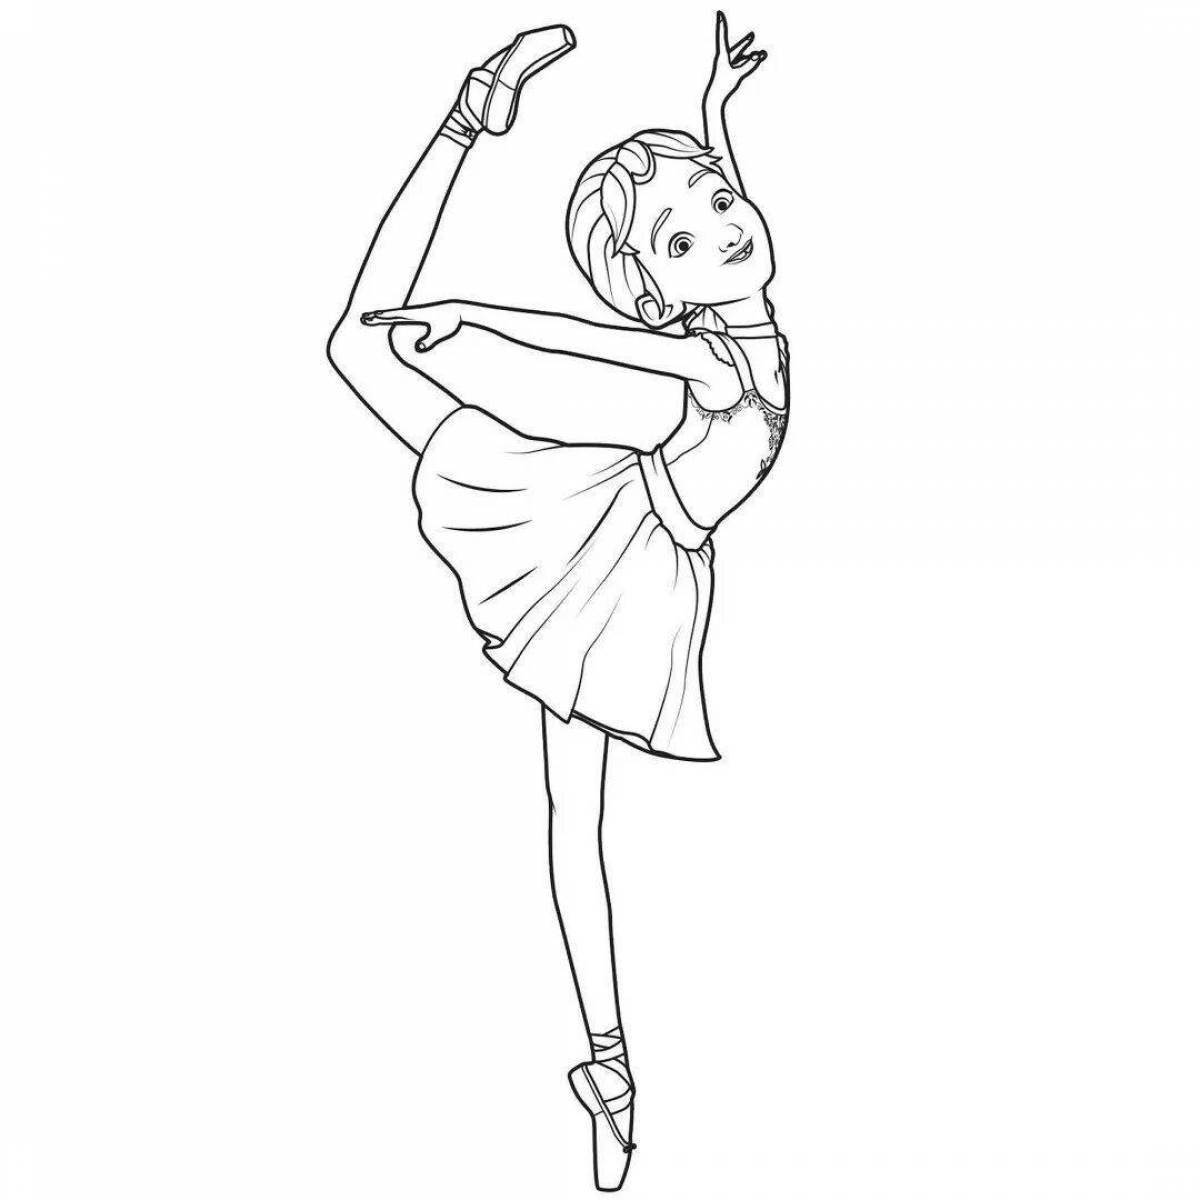 Charming ballerina coloring page